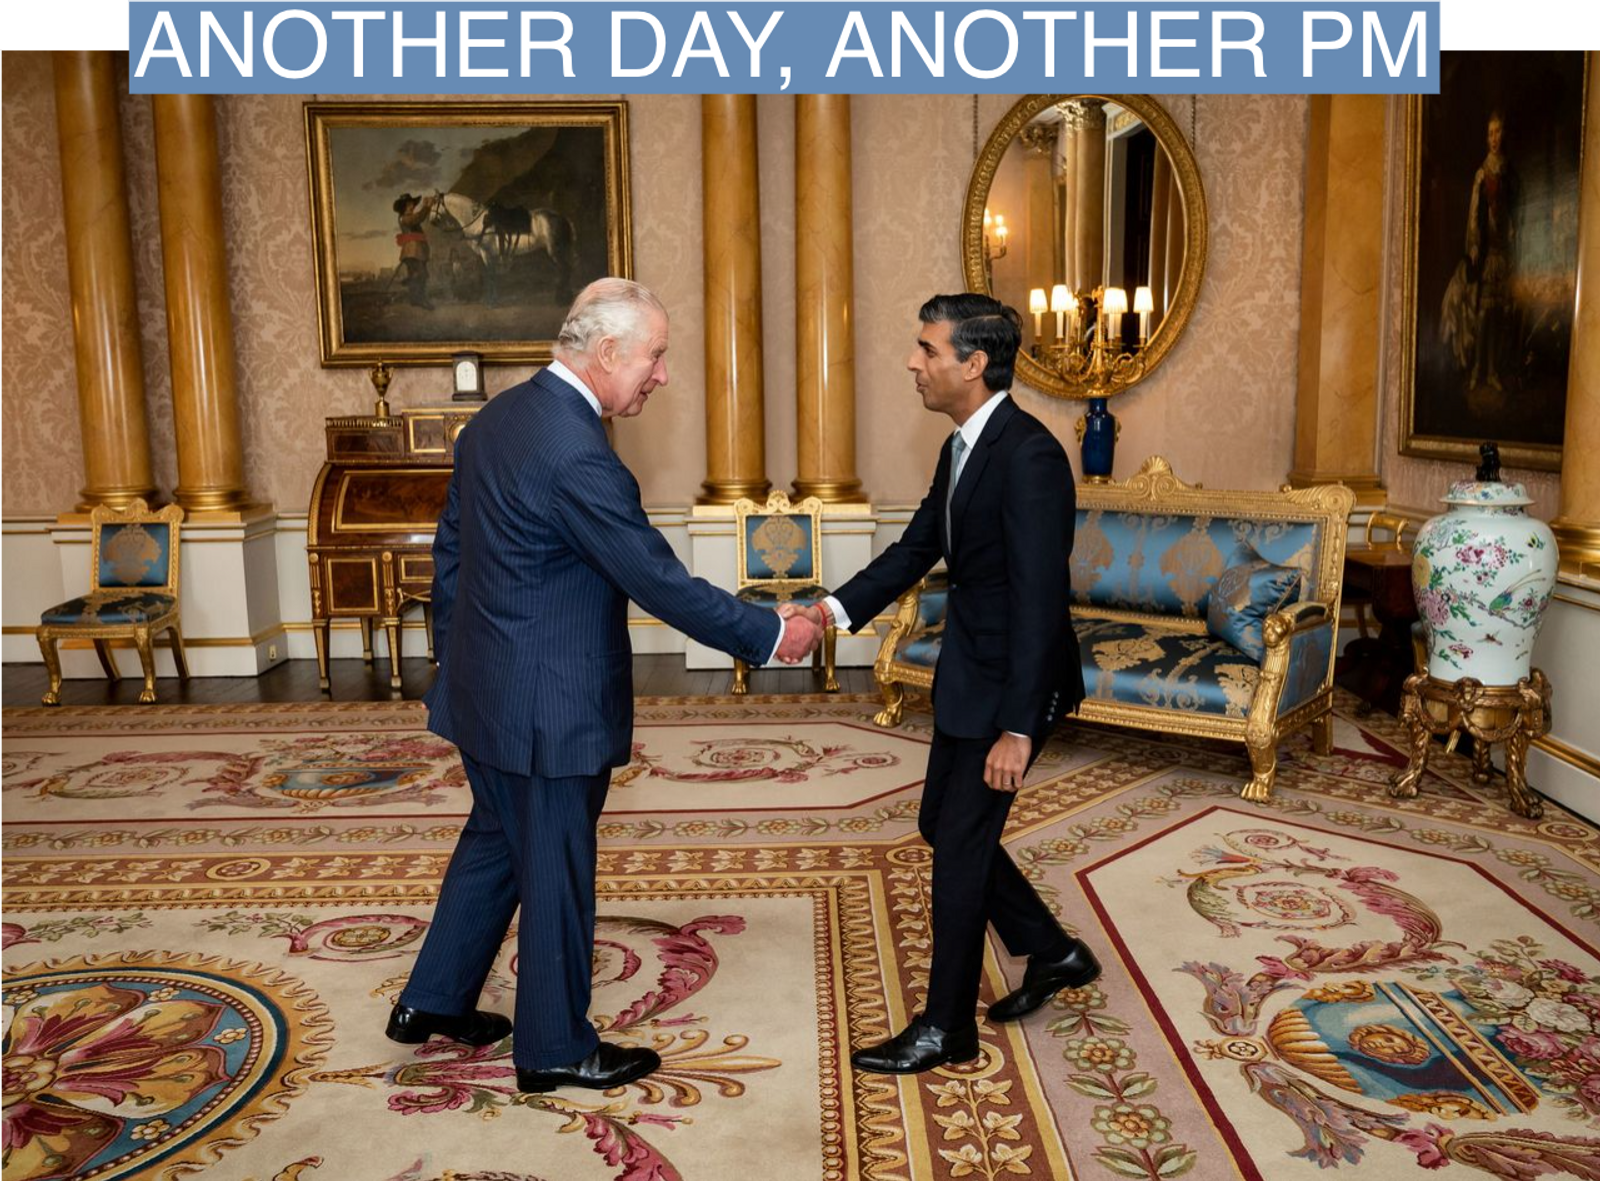 King Charles III welcomes Rishi Sunak during an audience at Buckingham Palace, London, where he invited the newly elected leader of the Conservative Party to become Prime Minister and form a new government.